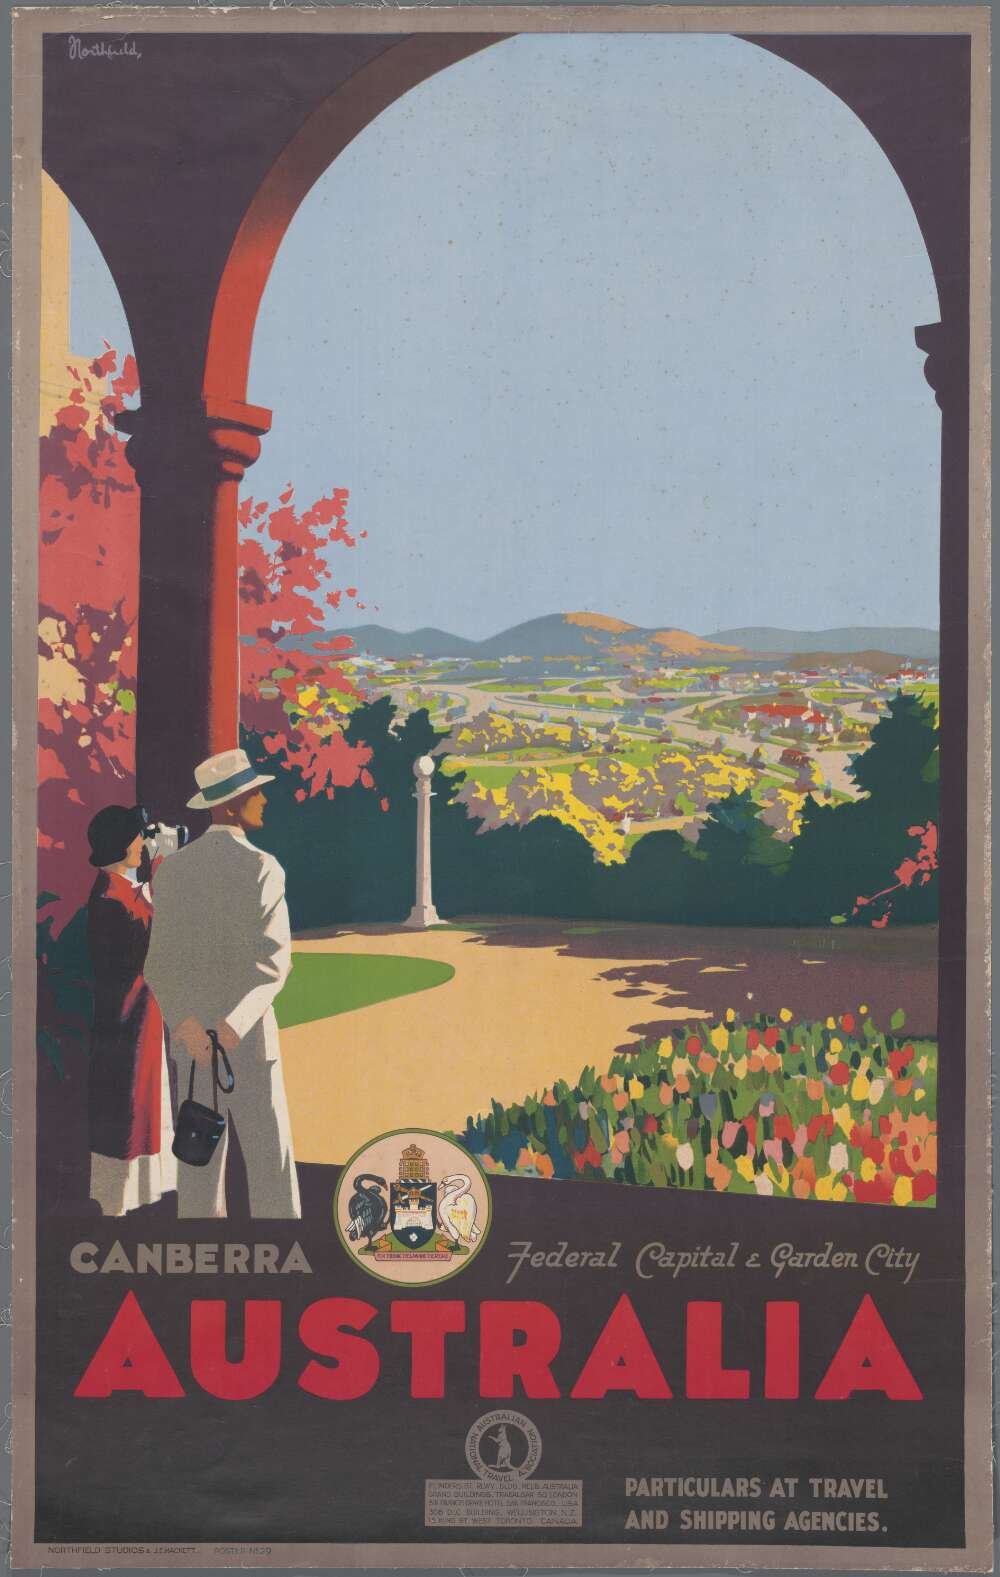 A poster depicts two people looking out over gardens; the text identifies the place as Canberra, Australia